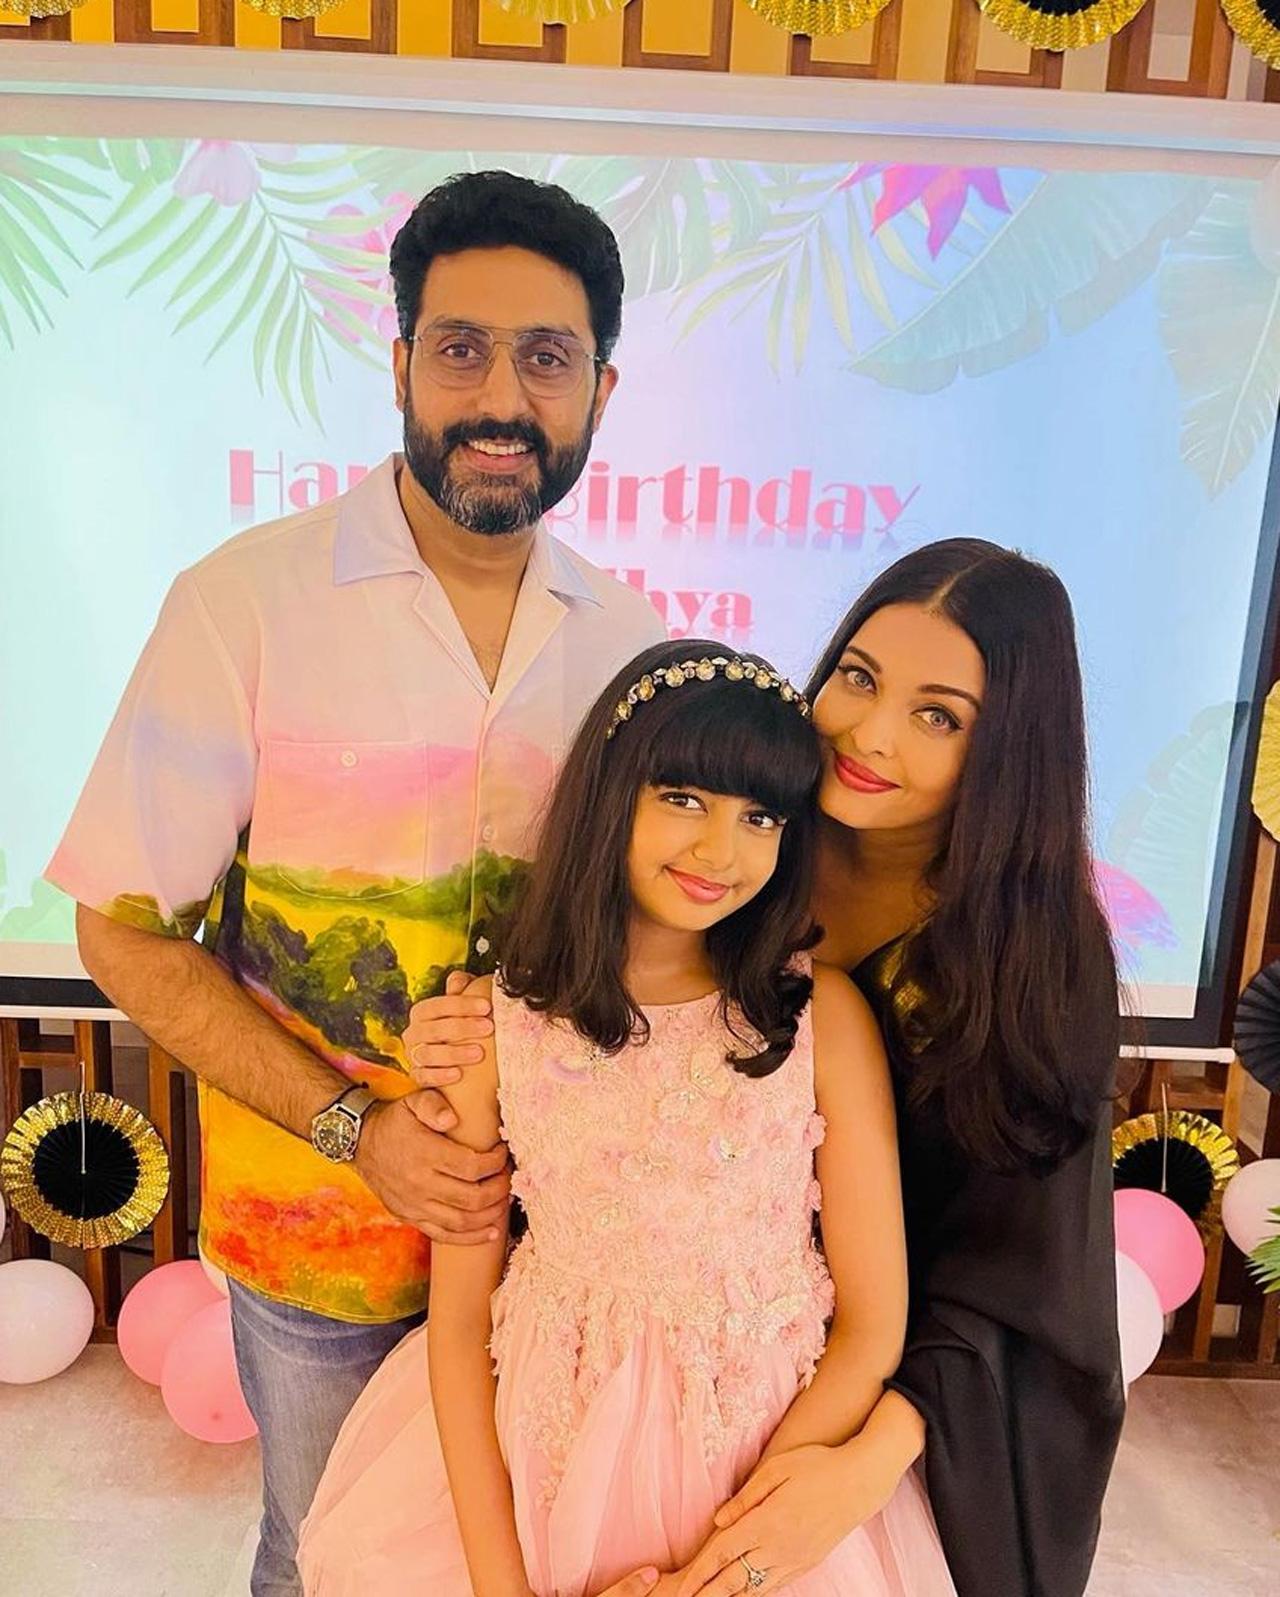 Actors Abhishek Bachchan and Aishwarya Rai Bachchan celebrated their daughter Aaradhya's 10th birthday on Tuesday in the Maldives. The duo shared inside pictures from the intimate birthday party on Wednesday.